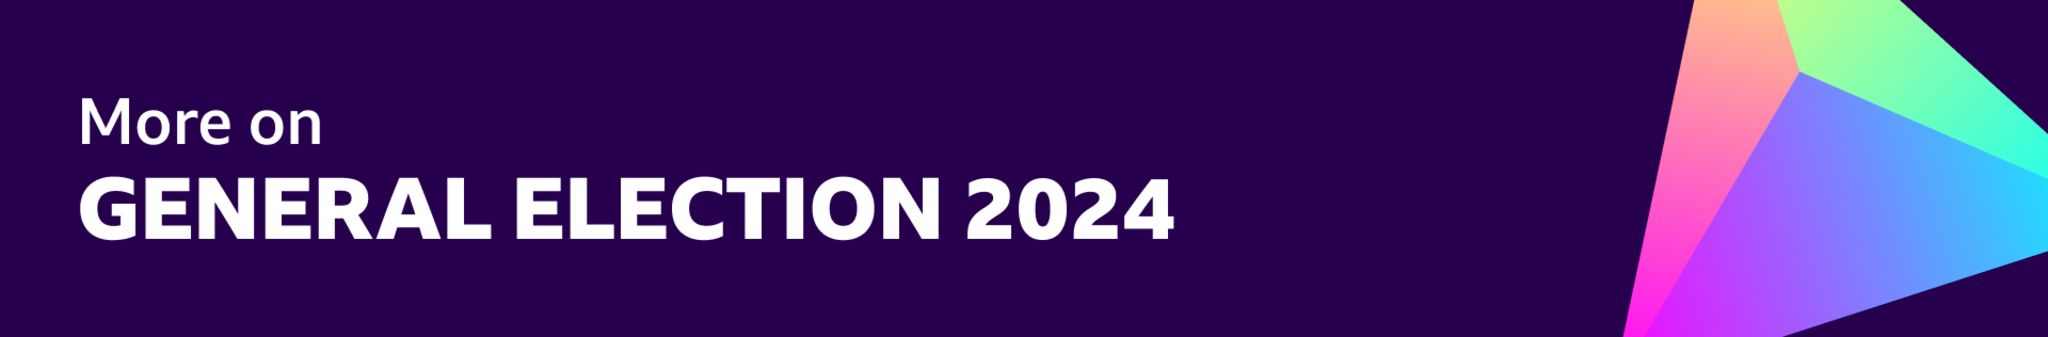 General election branding on a purple background